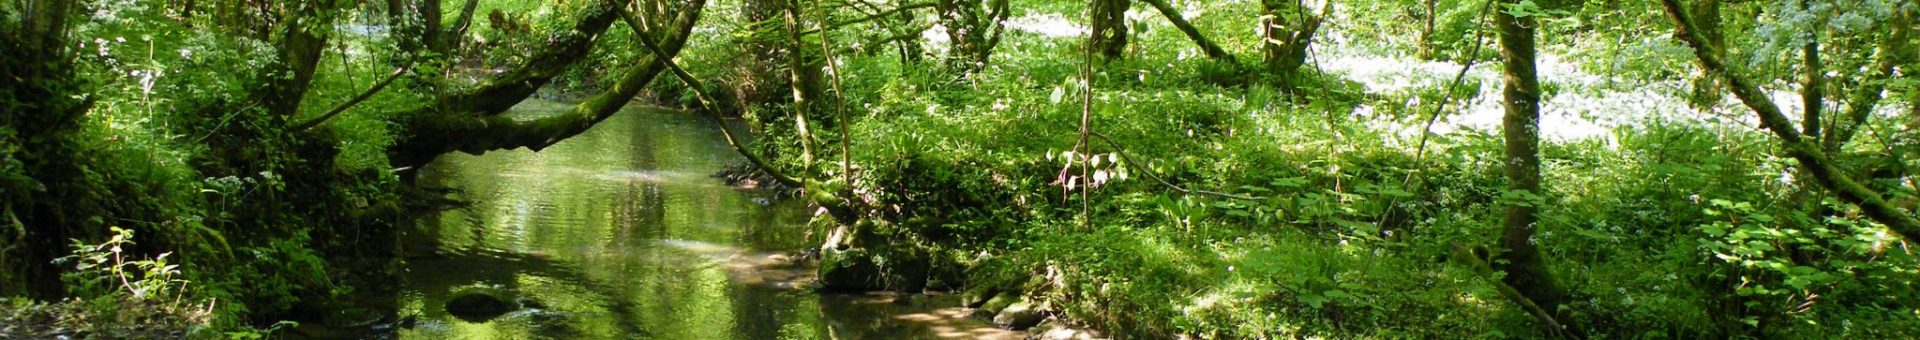 Photo of a river in woodland during summer.